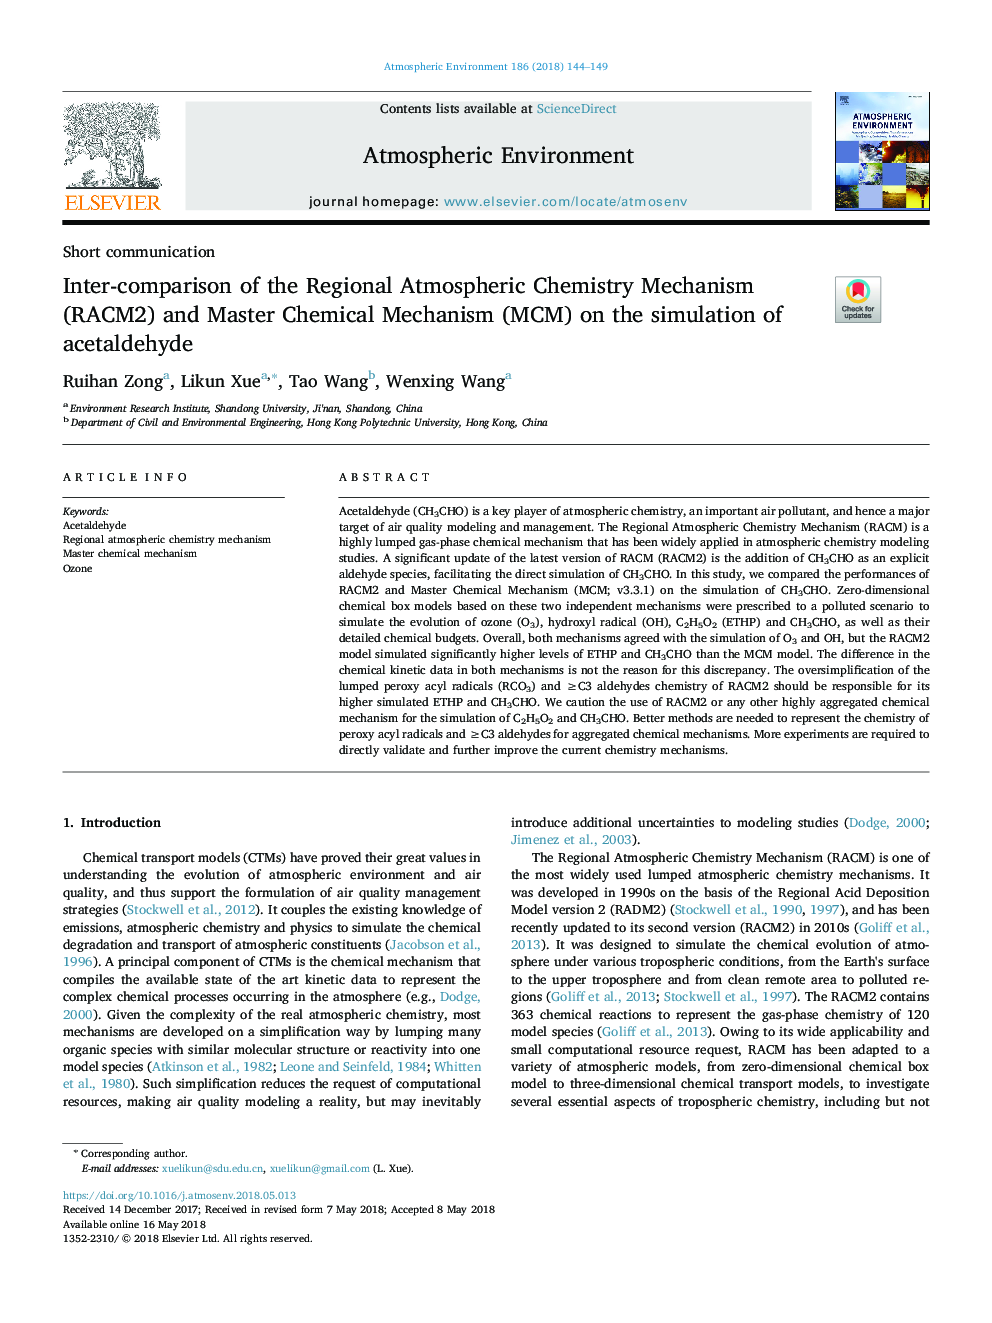 Inter-comparison of the Regional Atmospheric Chemistry Mechanism (RACM2) and Master Chemical Mechanism (MCM) on the simulation of acetaldehyde